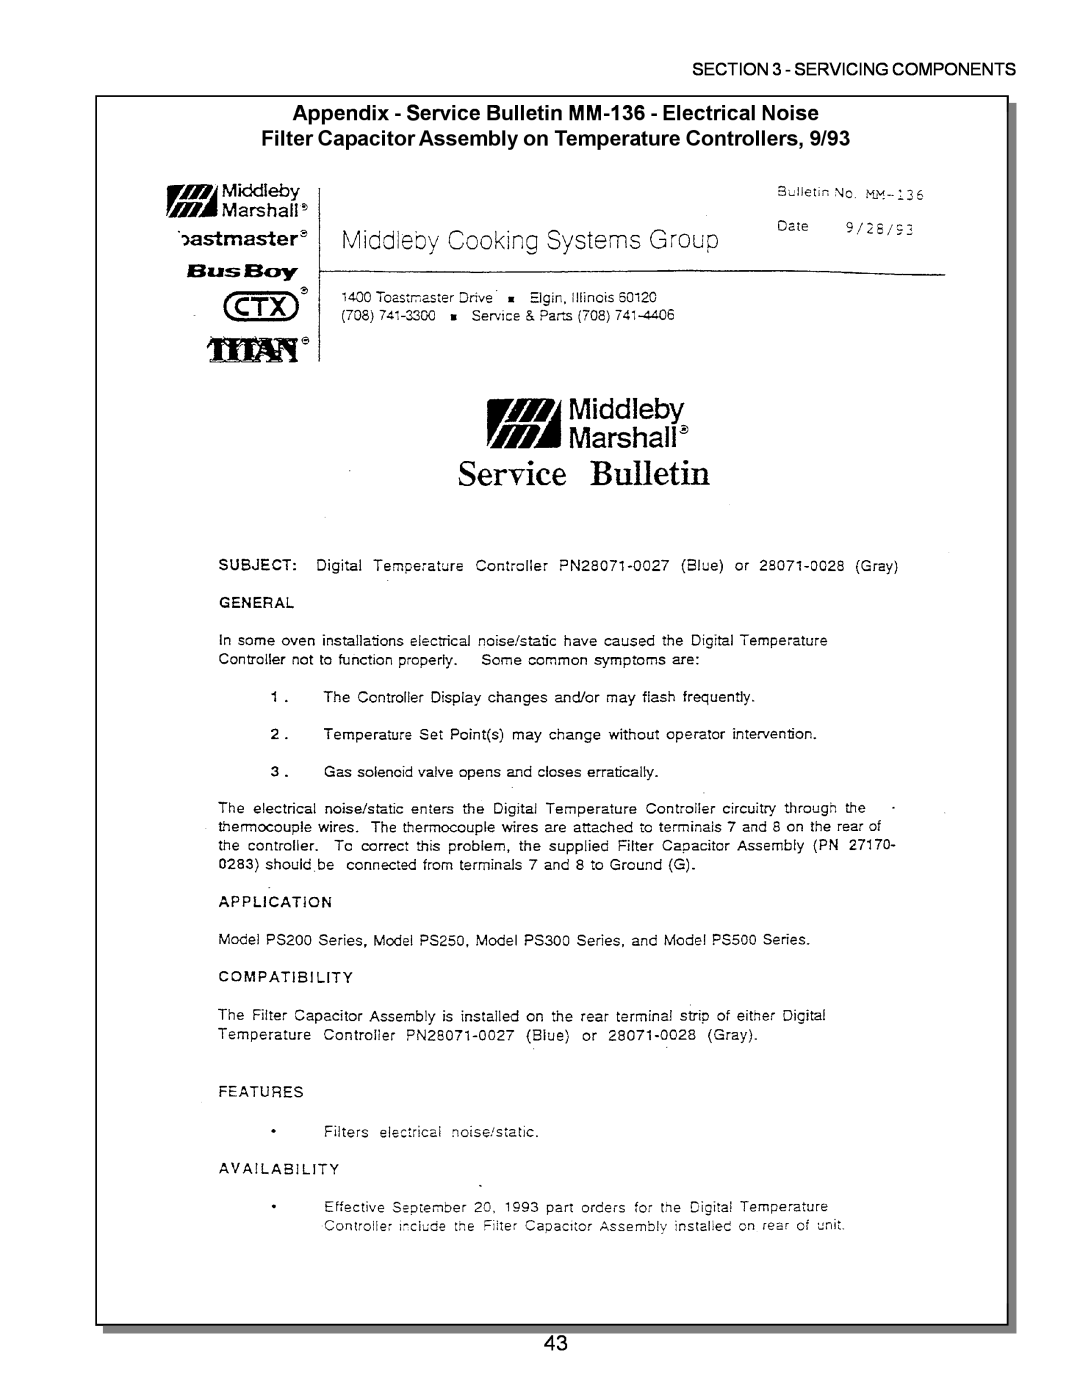 Middleby Marshall PS200, PS570, PS360, PS555 Appendix - Service Bulletin MM-136 - Electrical Noise, Servicing Components 